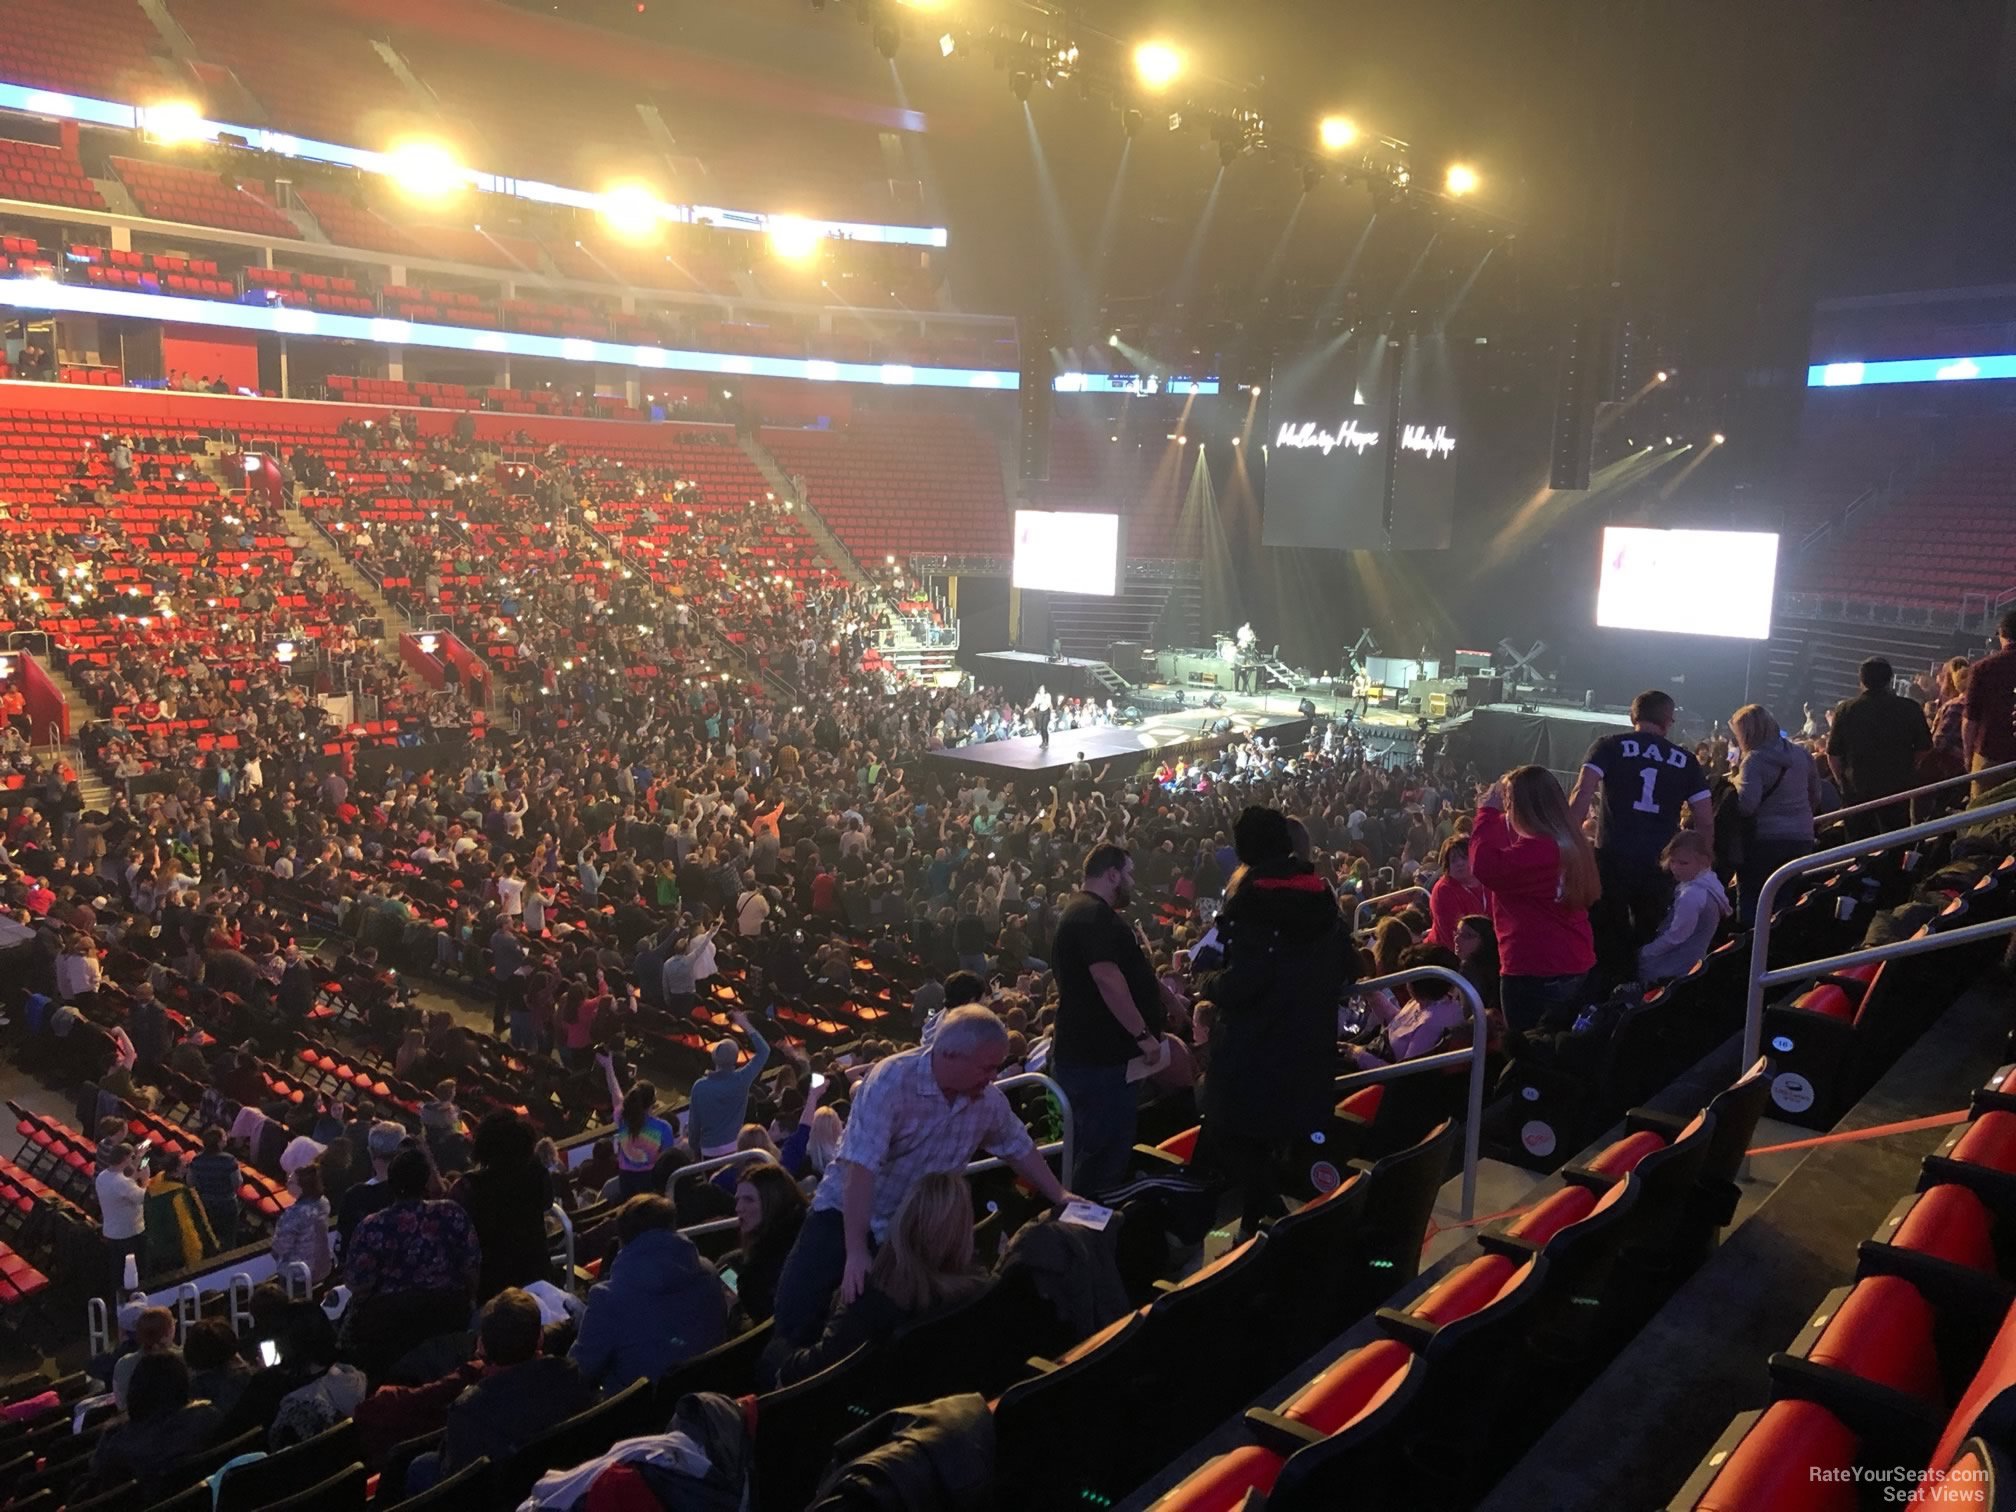 section 112, row 18 seat view  for concert - little caesars arena